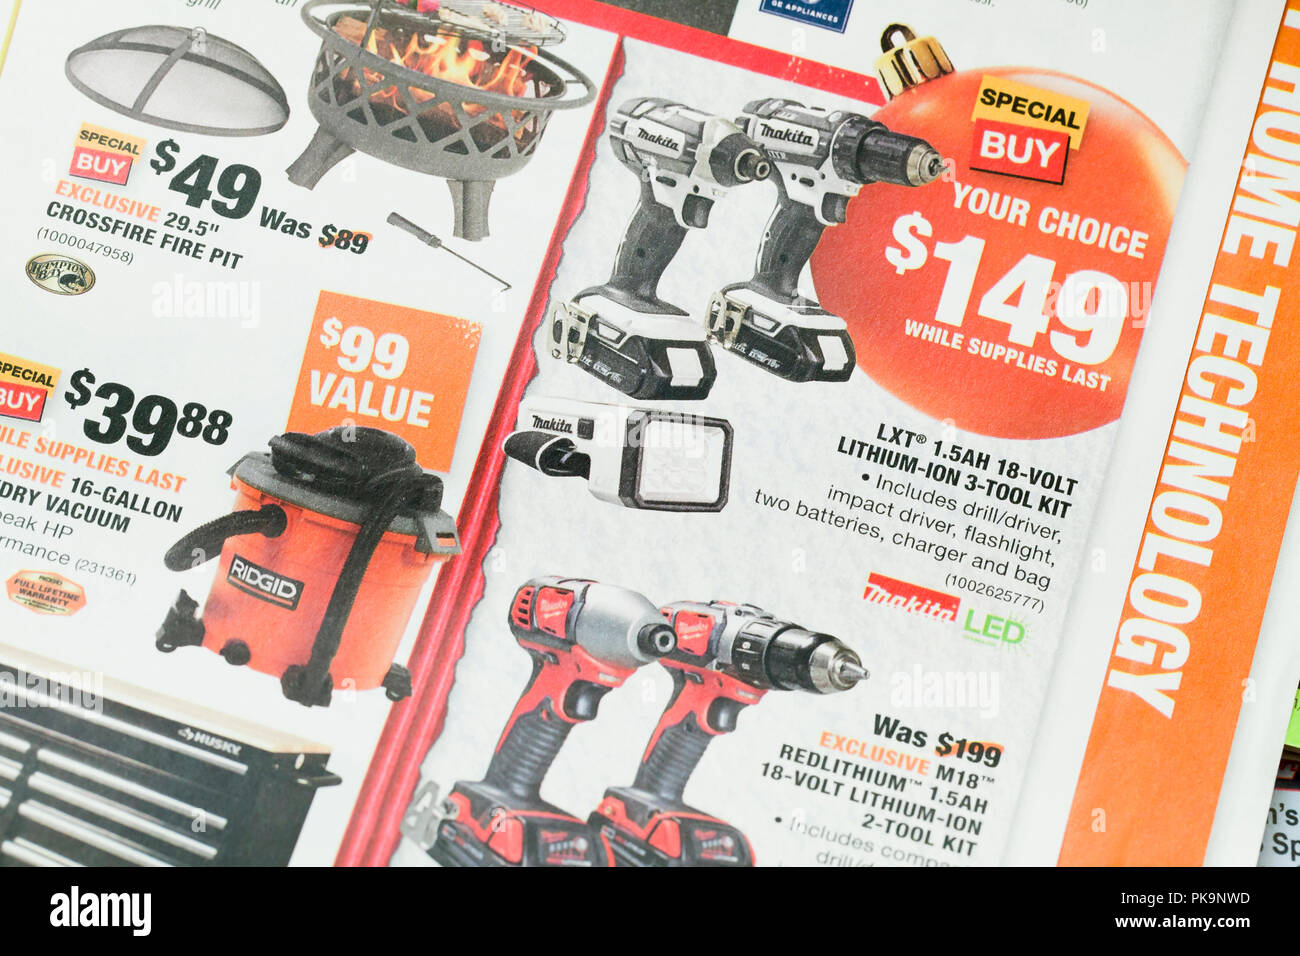 Weekly mailer advertisement from Home Depot (hardware store) - USA Stock Photo